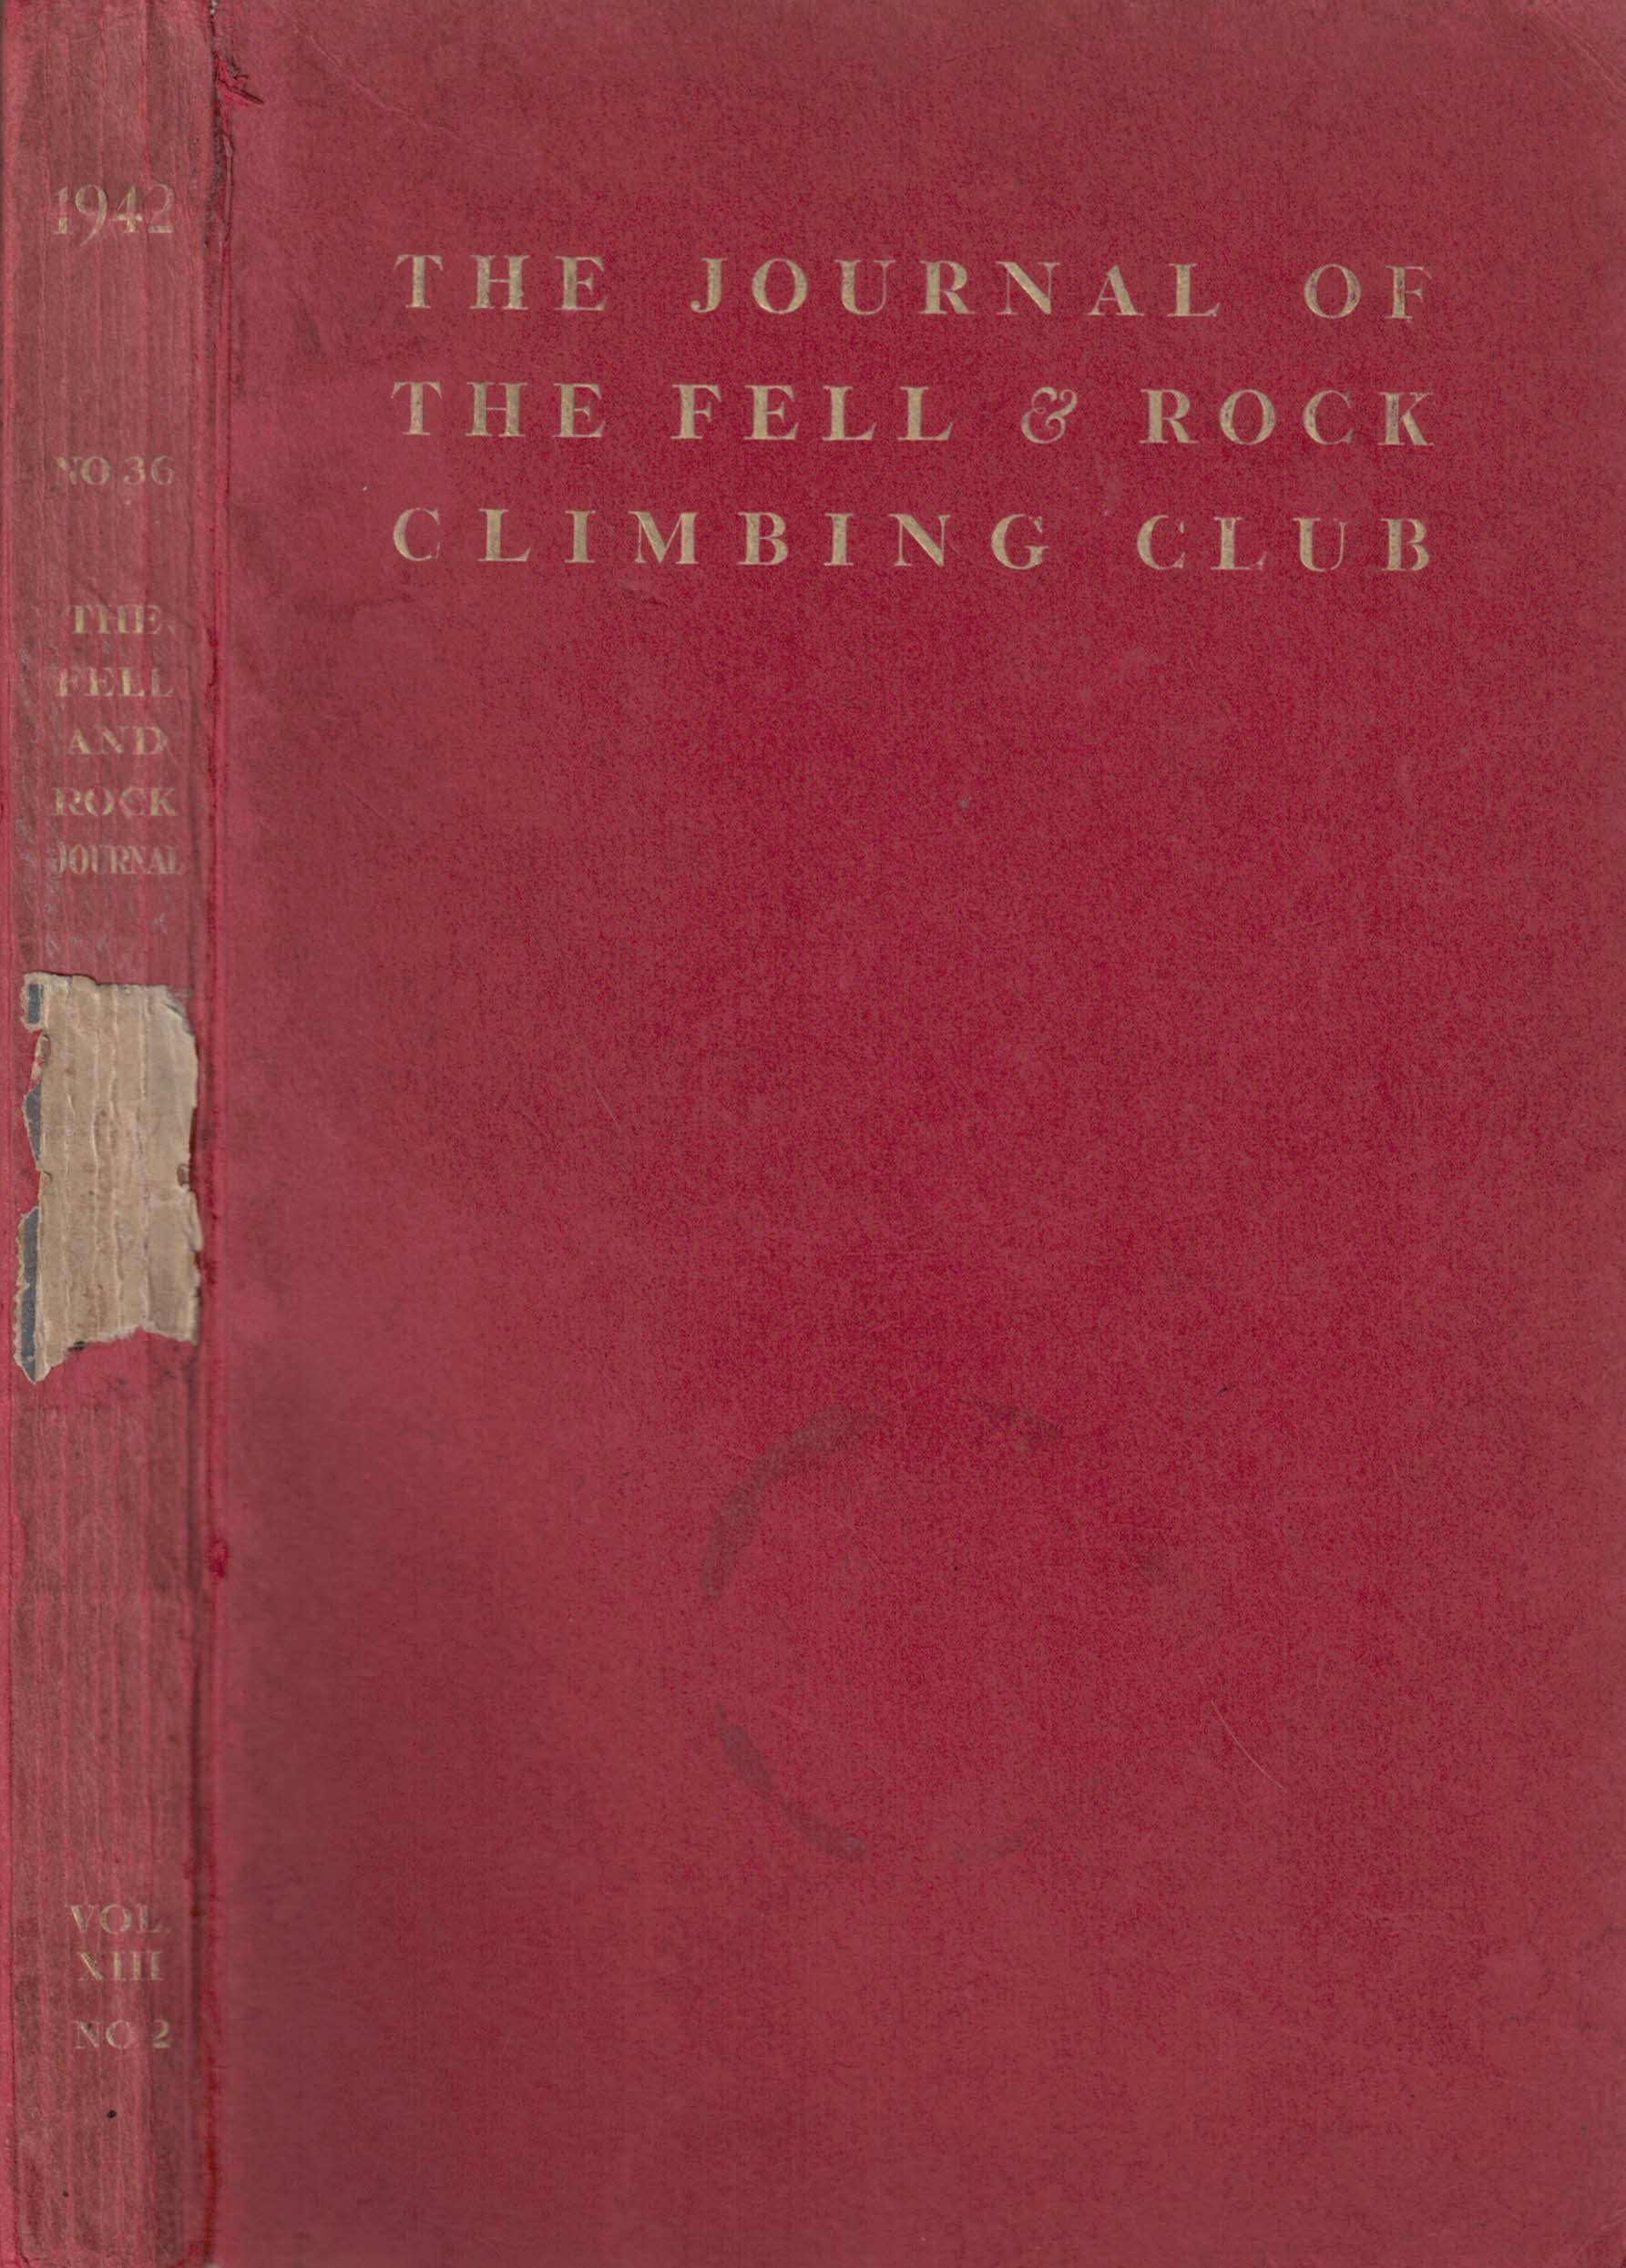 The Journal of the Fell & Rock Climbing Club of the English Lake District. No 36. (Volume 13 No 2) 1942.